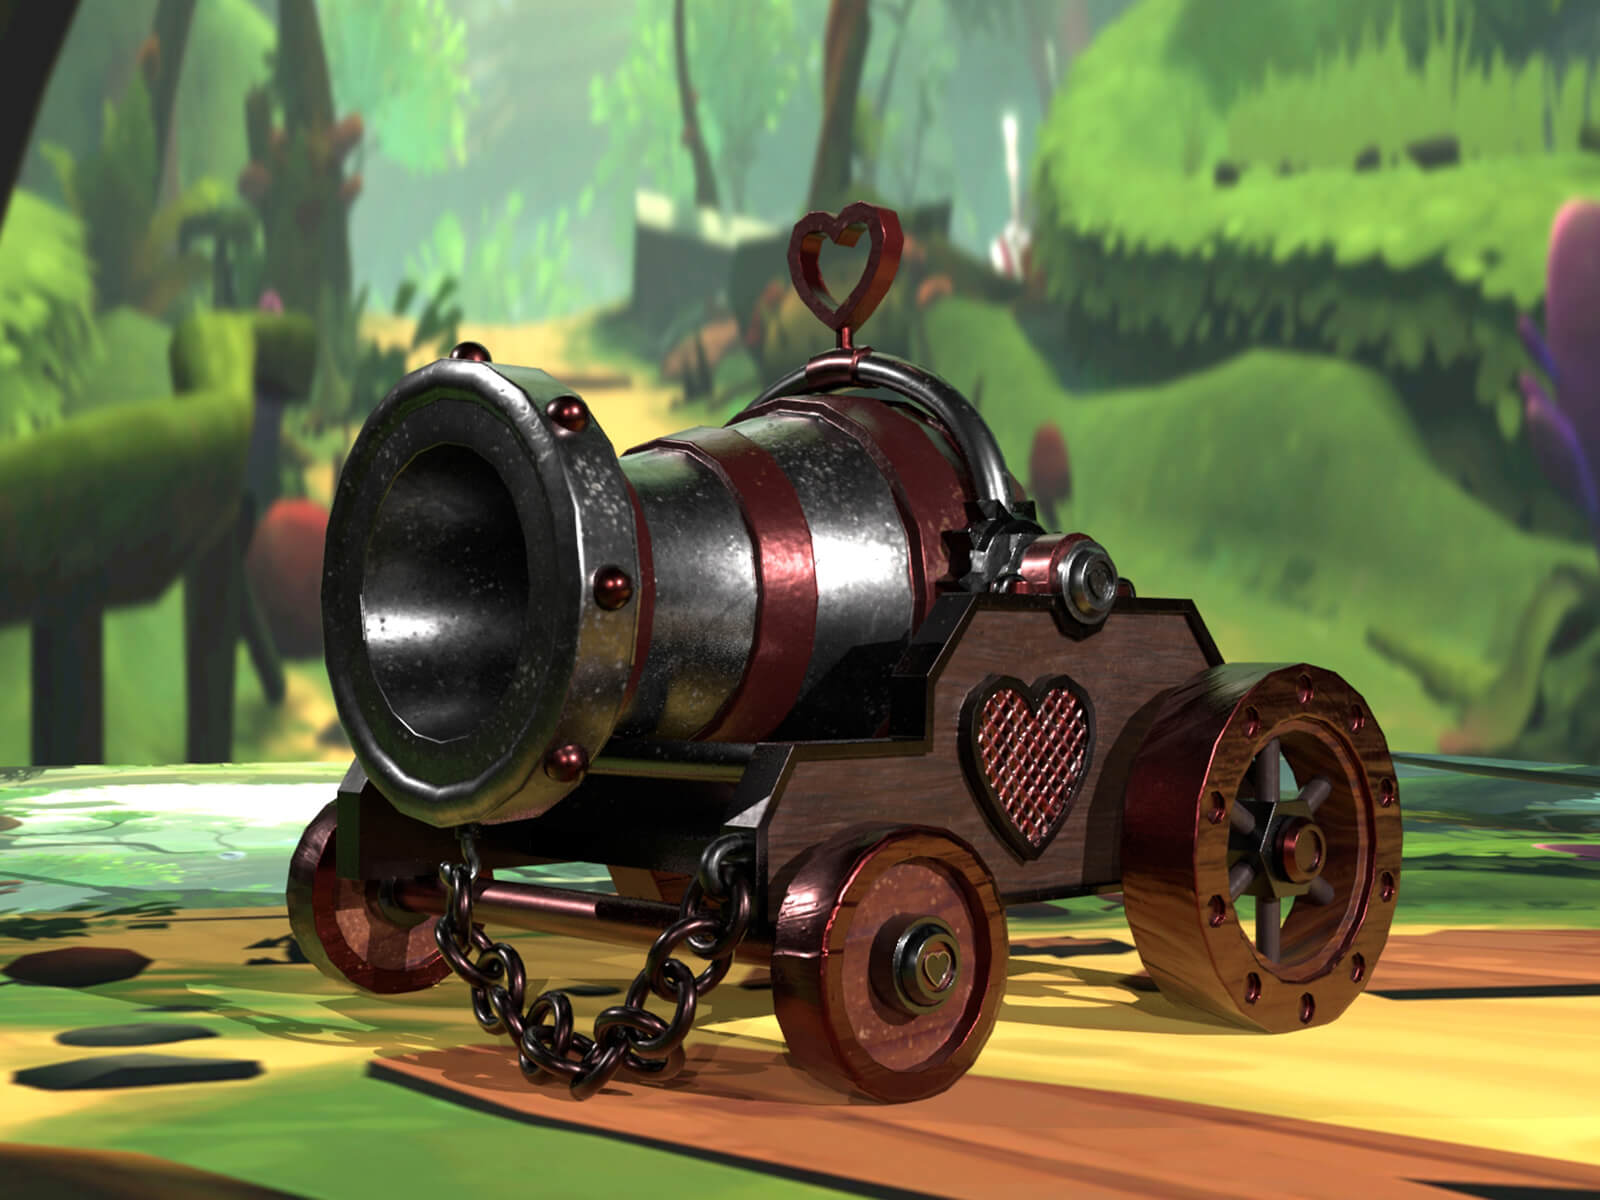 A cannon with a heart on its side in a cartoon world